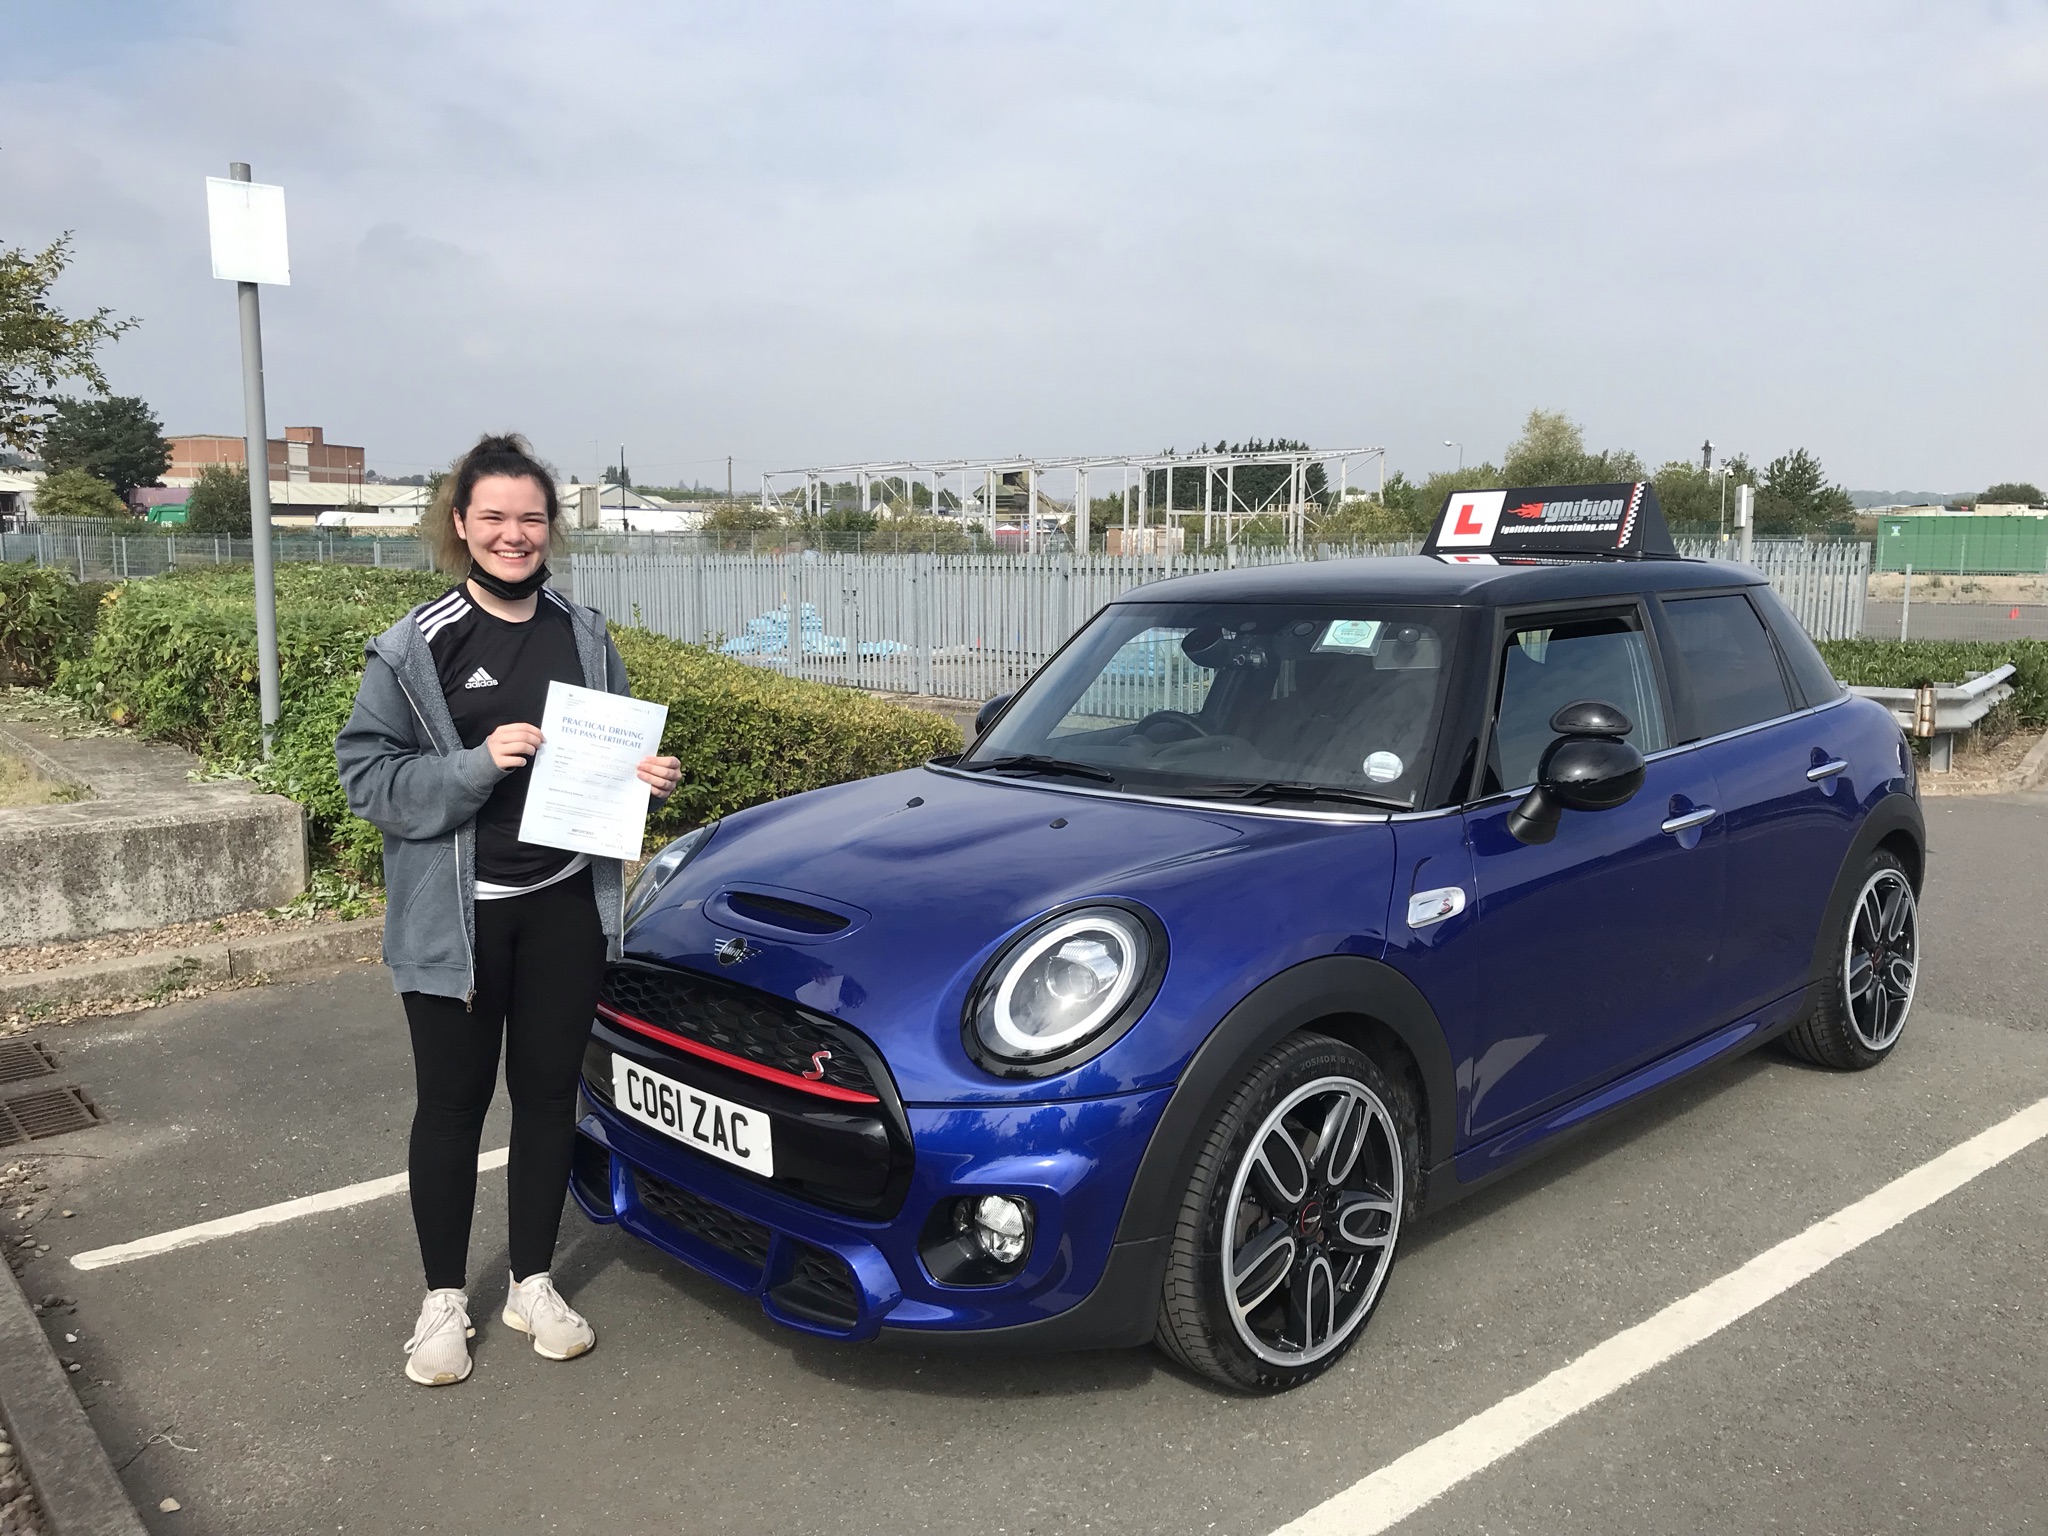 Izzy passed first time!